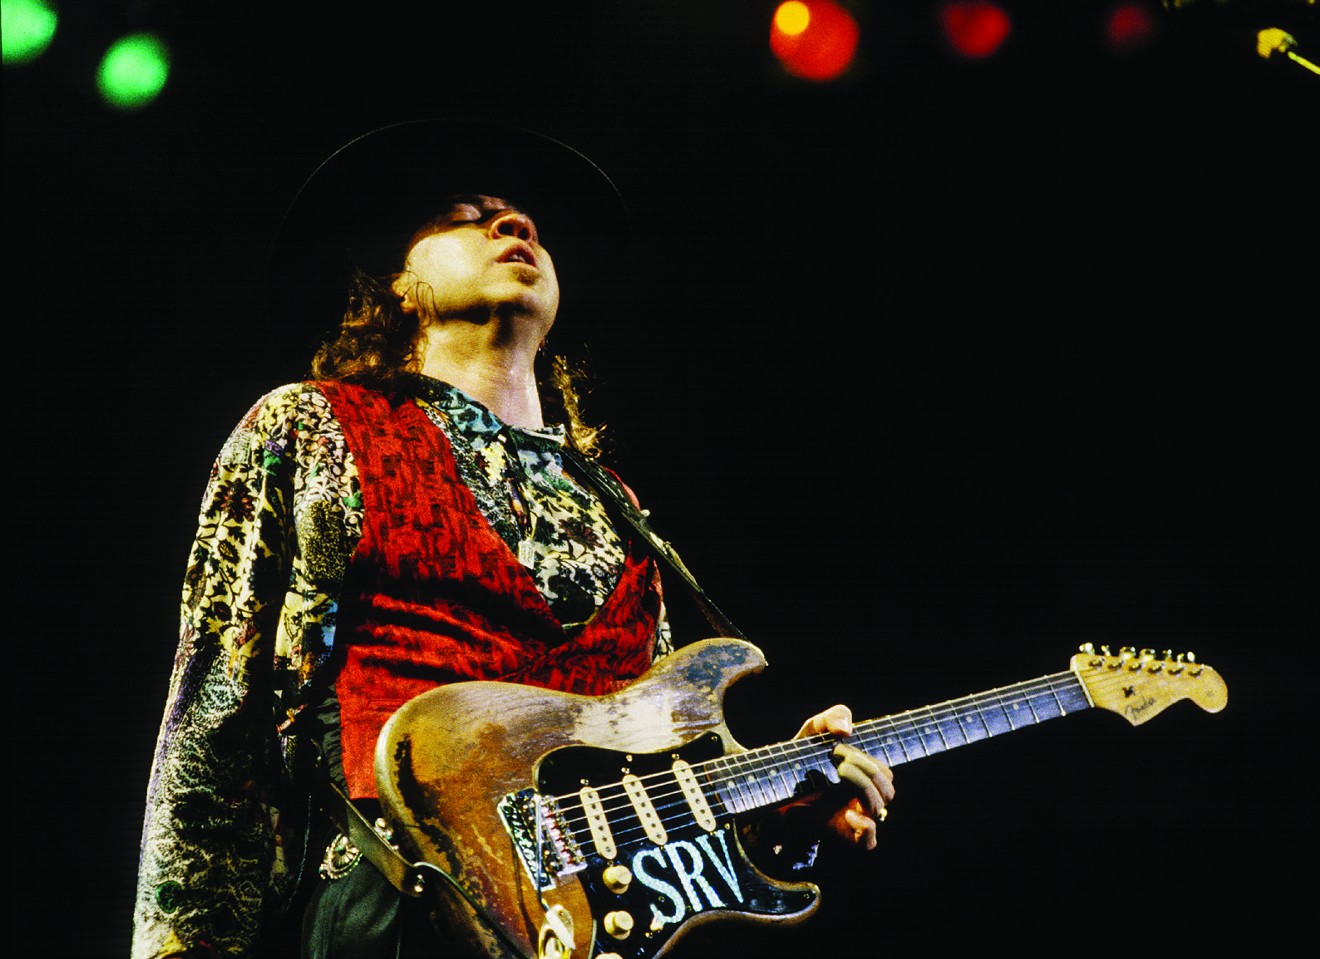 Stevie Ray during his final show in 1989